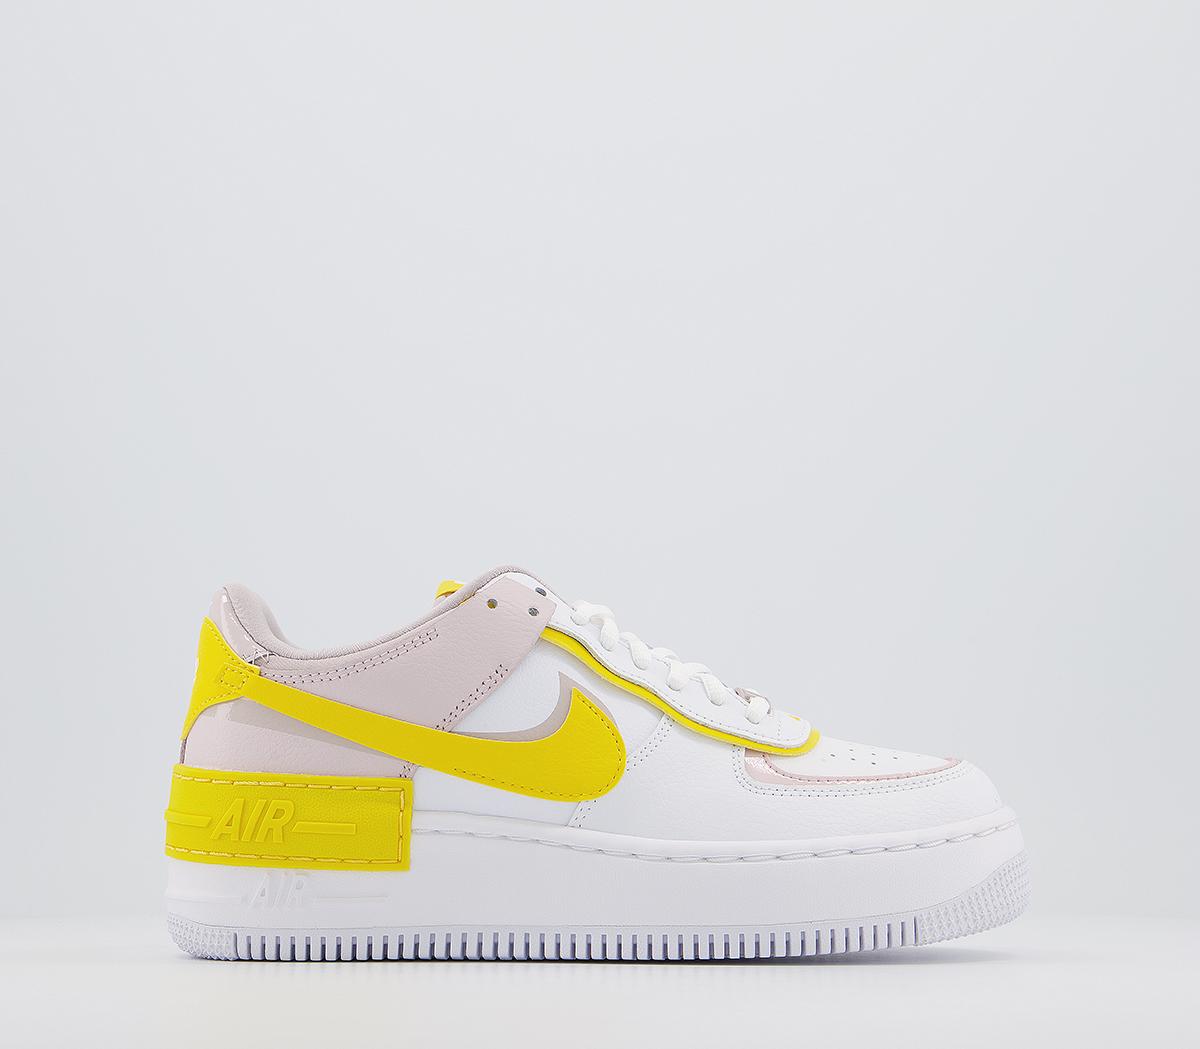 bros Verbinding verbroken Siësta Nike Air Force 1 Shadow Trainers White Speed Yellow Barely Rose - Unisex  Sports